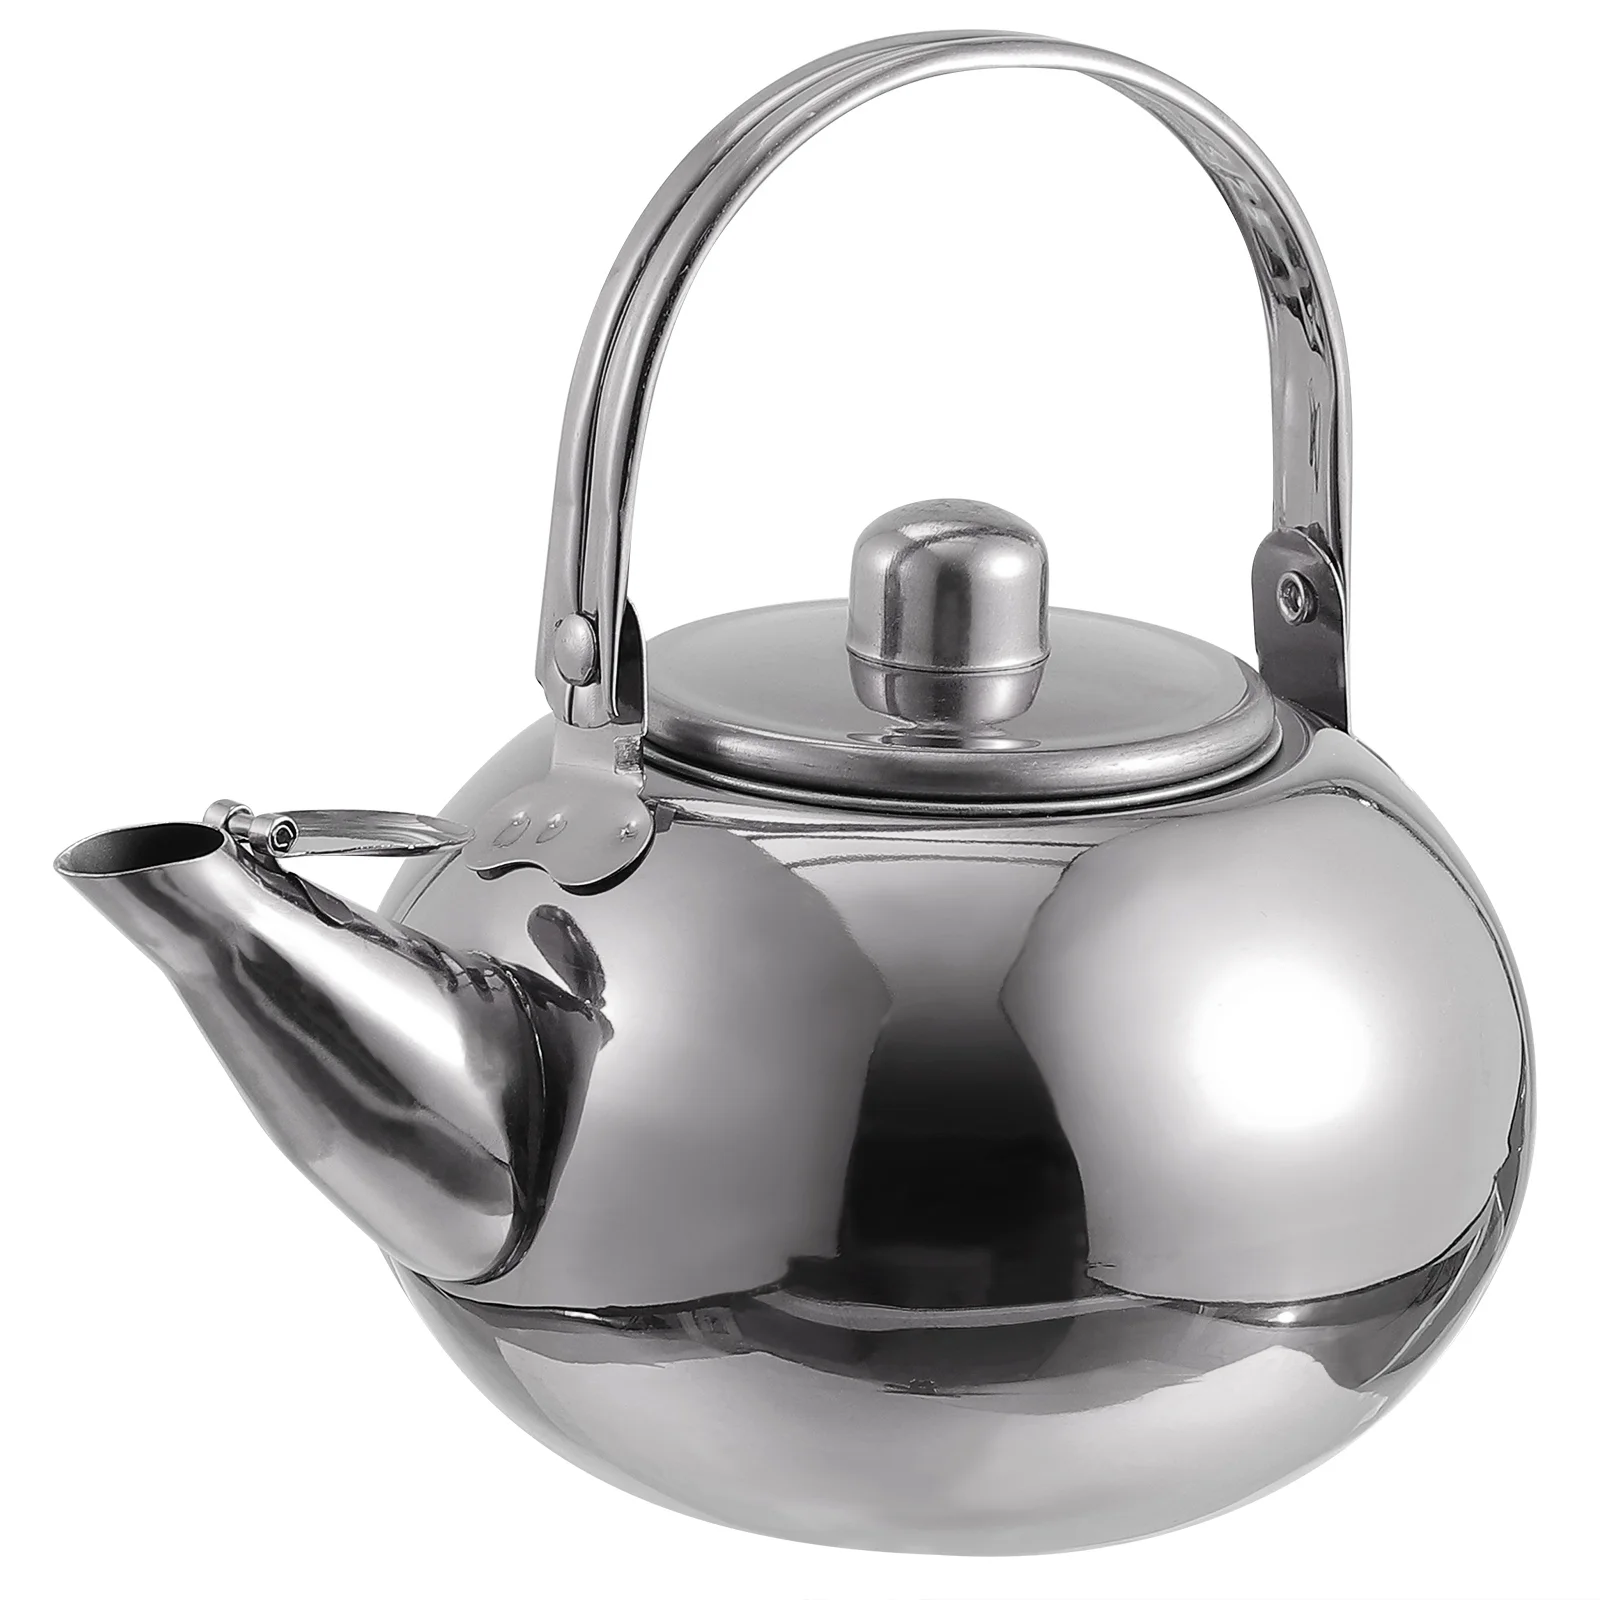 

1L stove teapot 304 Stainless Steel Teapot with Removable Infuser Tea Kettle Stovetop Safe Teapot for Loose Leaf Blooming Tea